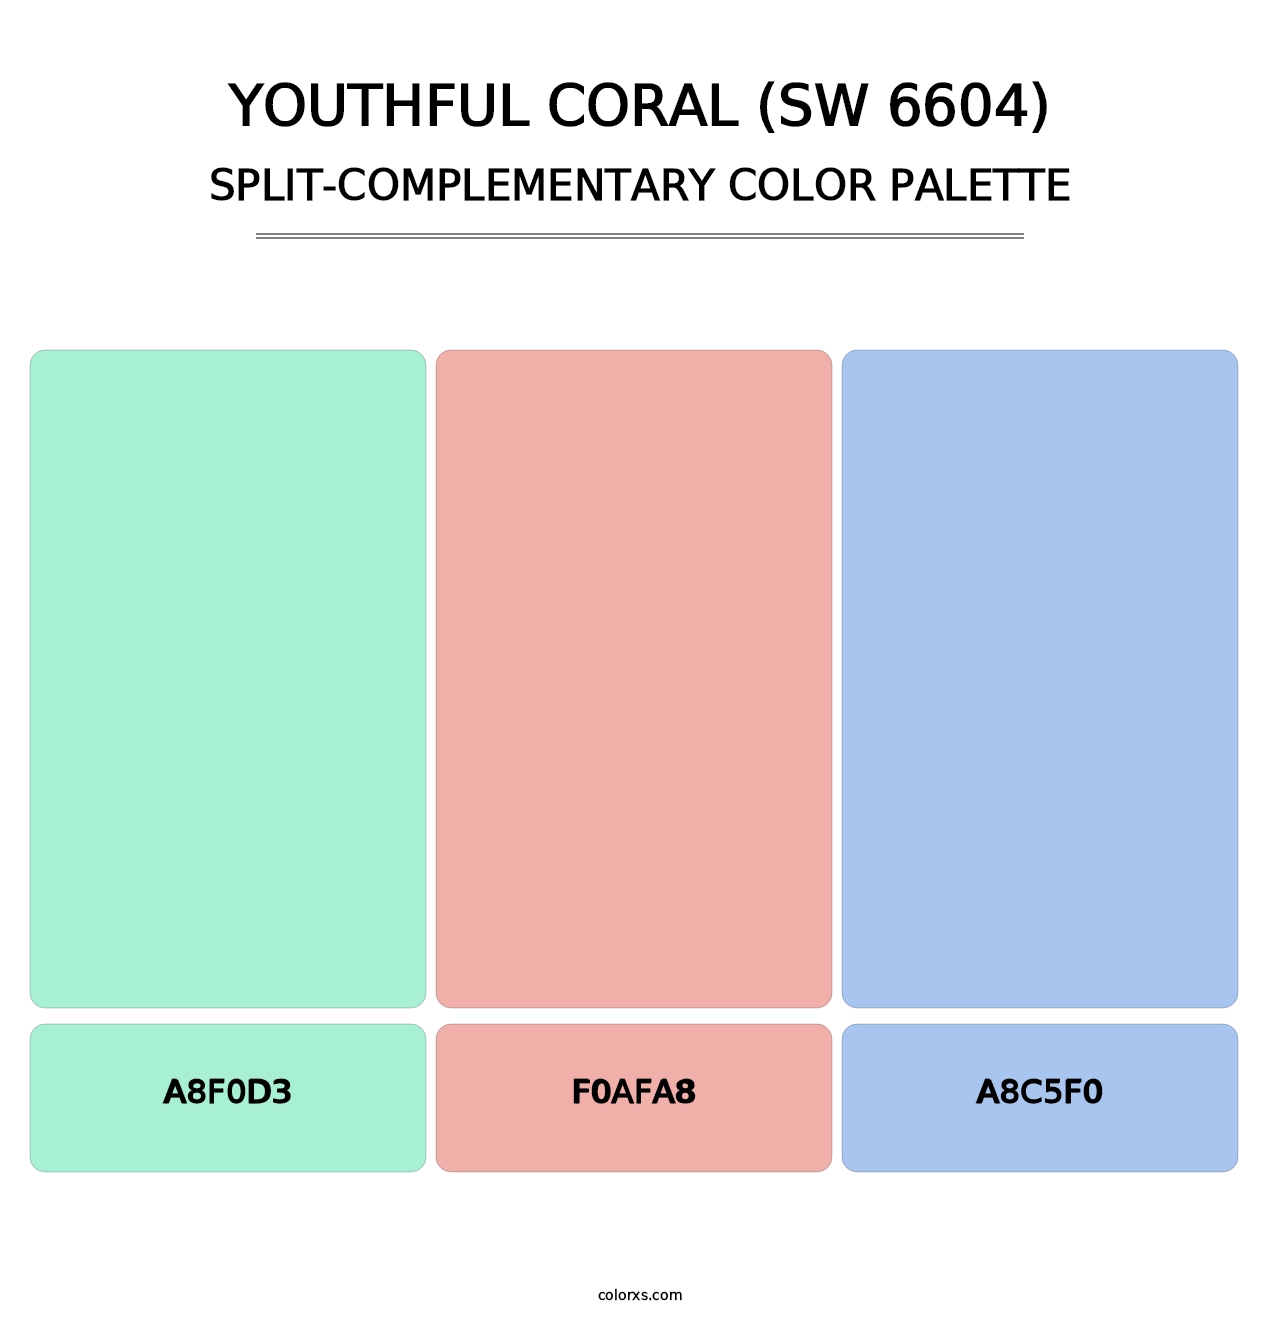 Youthful Coral (SW 6604) - Split-Complementary Color Palette